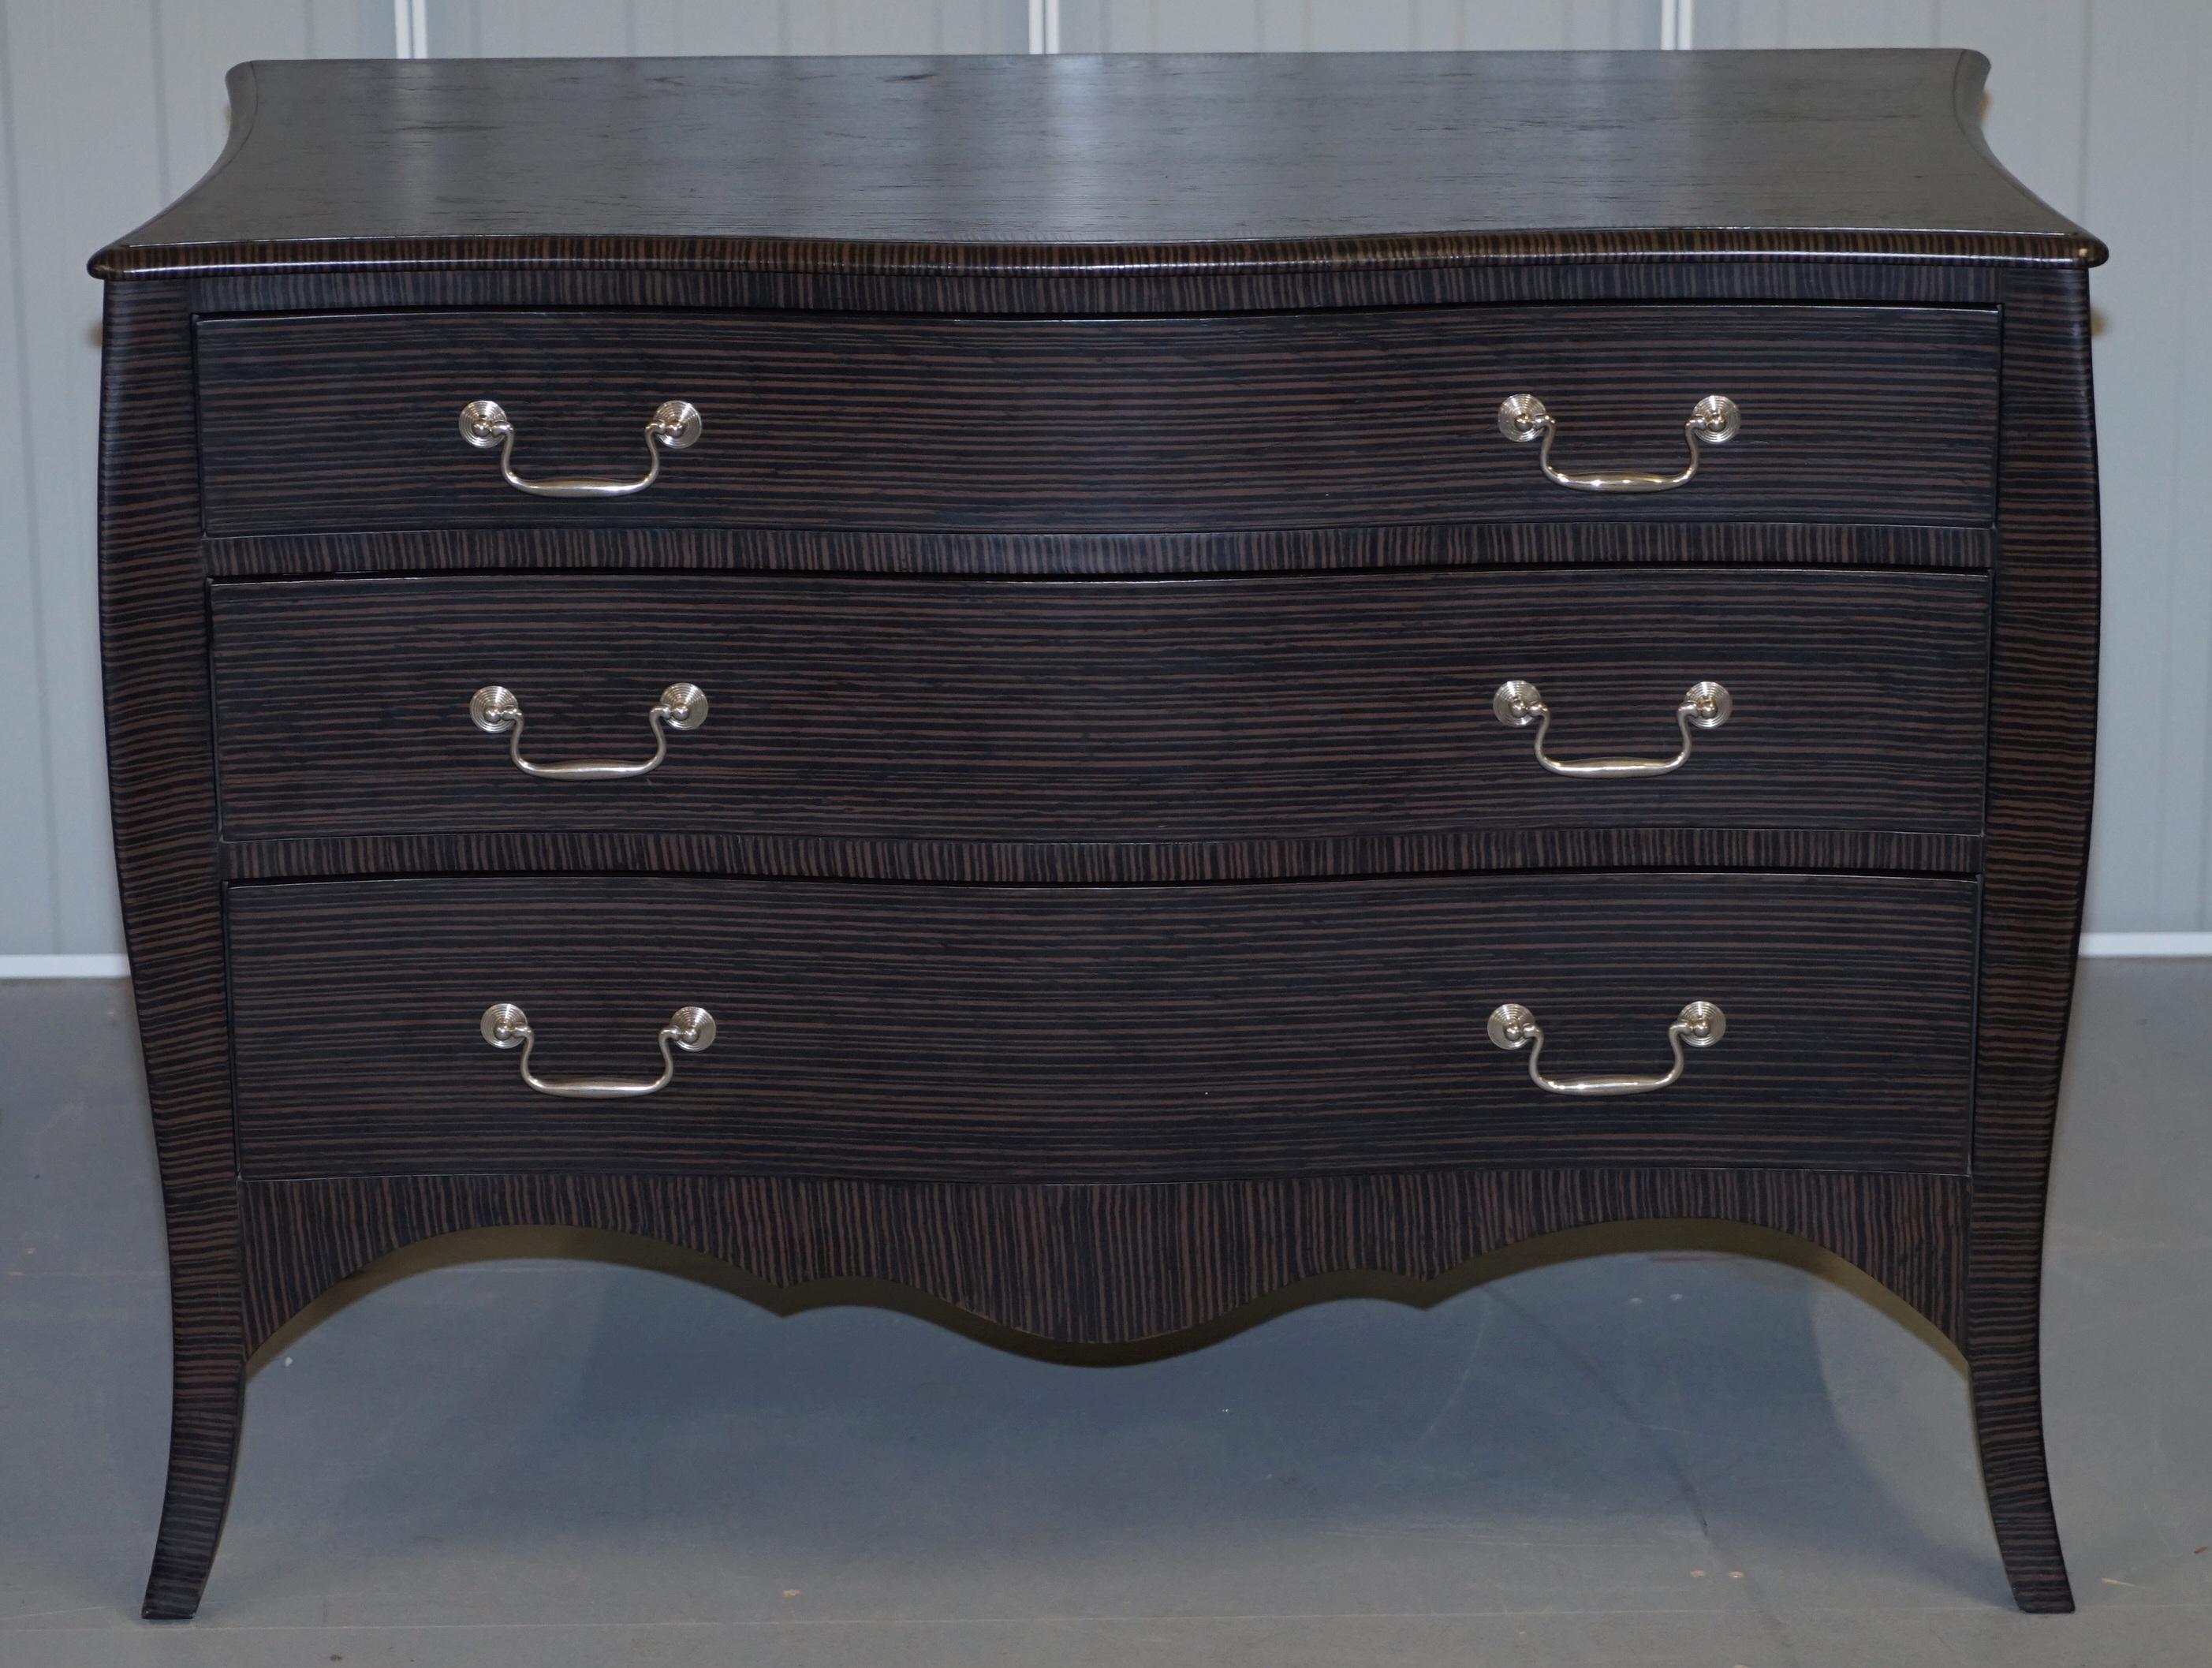 We are delighted to offer for sale this lovely RRP £2699 Julian Chichester chest of drawers 

A good looking well made and decorative piece, they have a nice serpentine front, the frame is oak with a striped black and brown finish which looks very